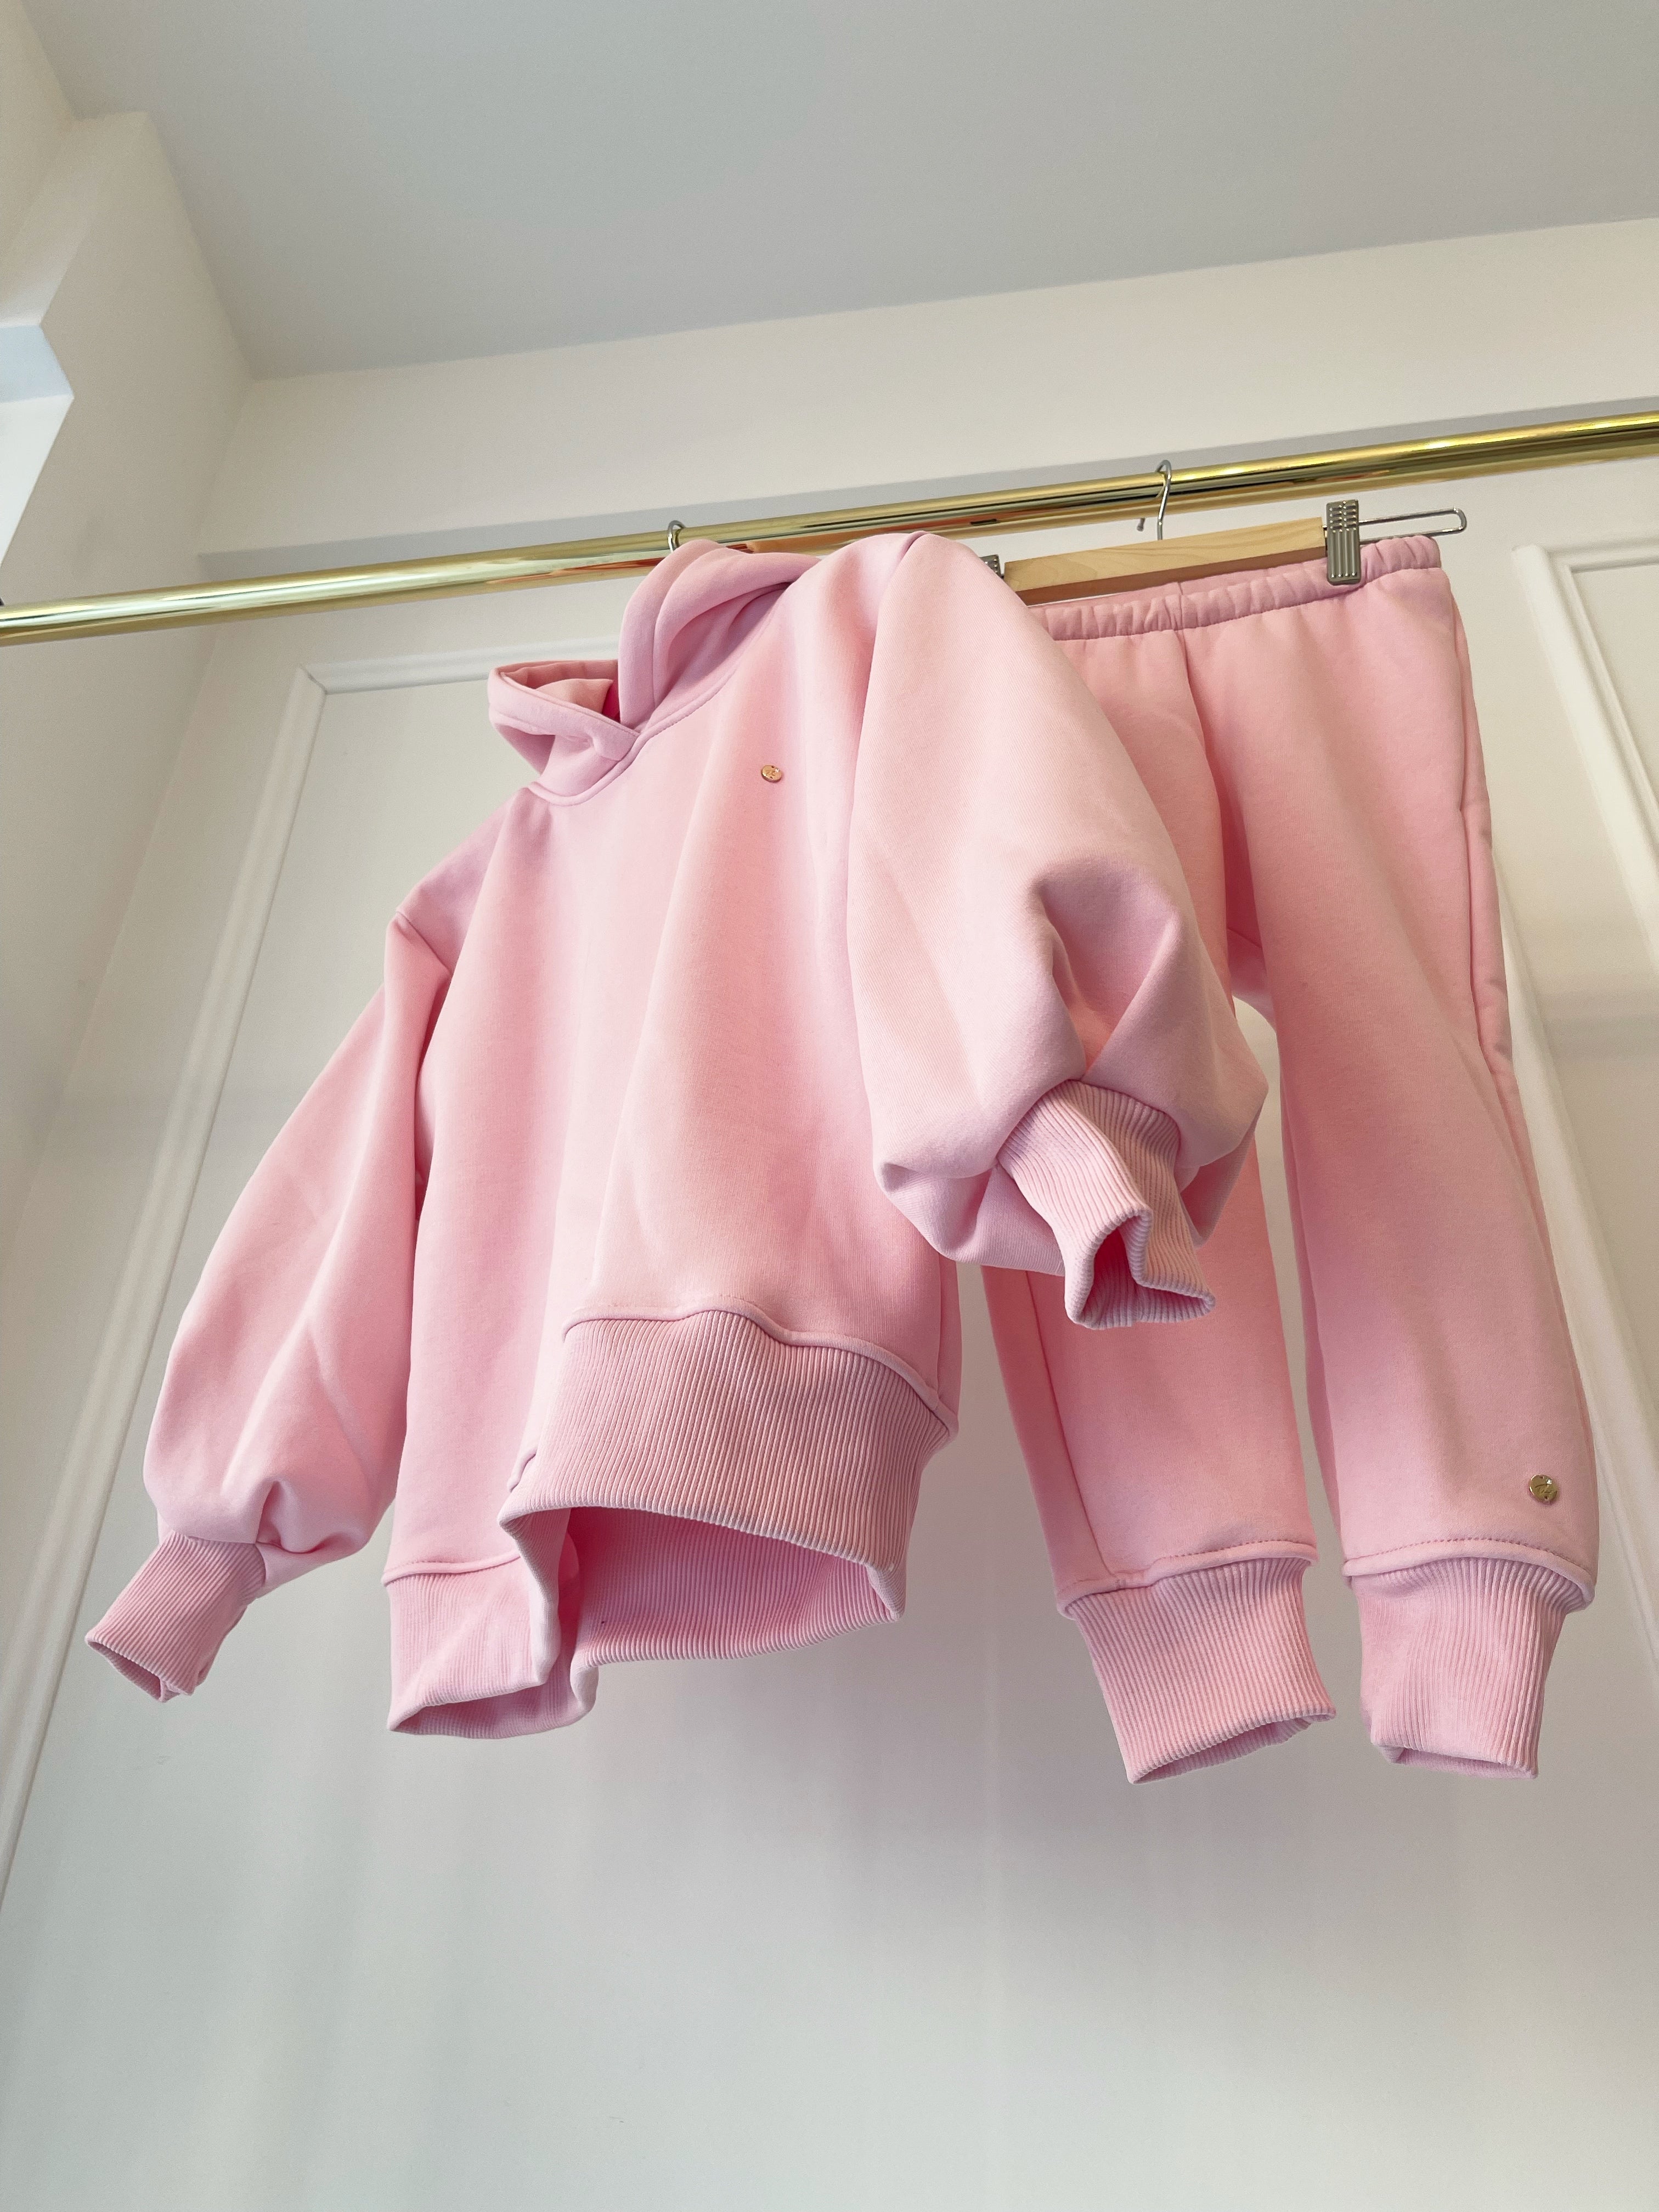 "Blush" Hoodie for Kids - Various Colors